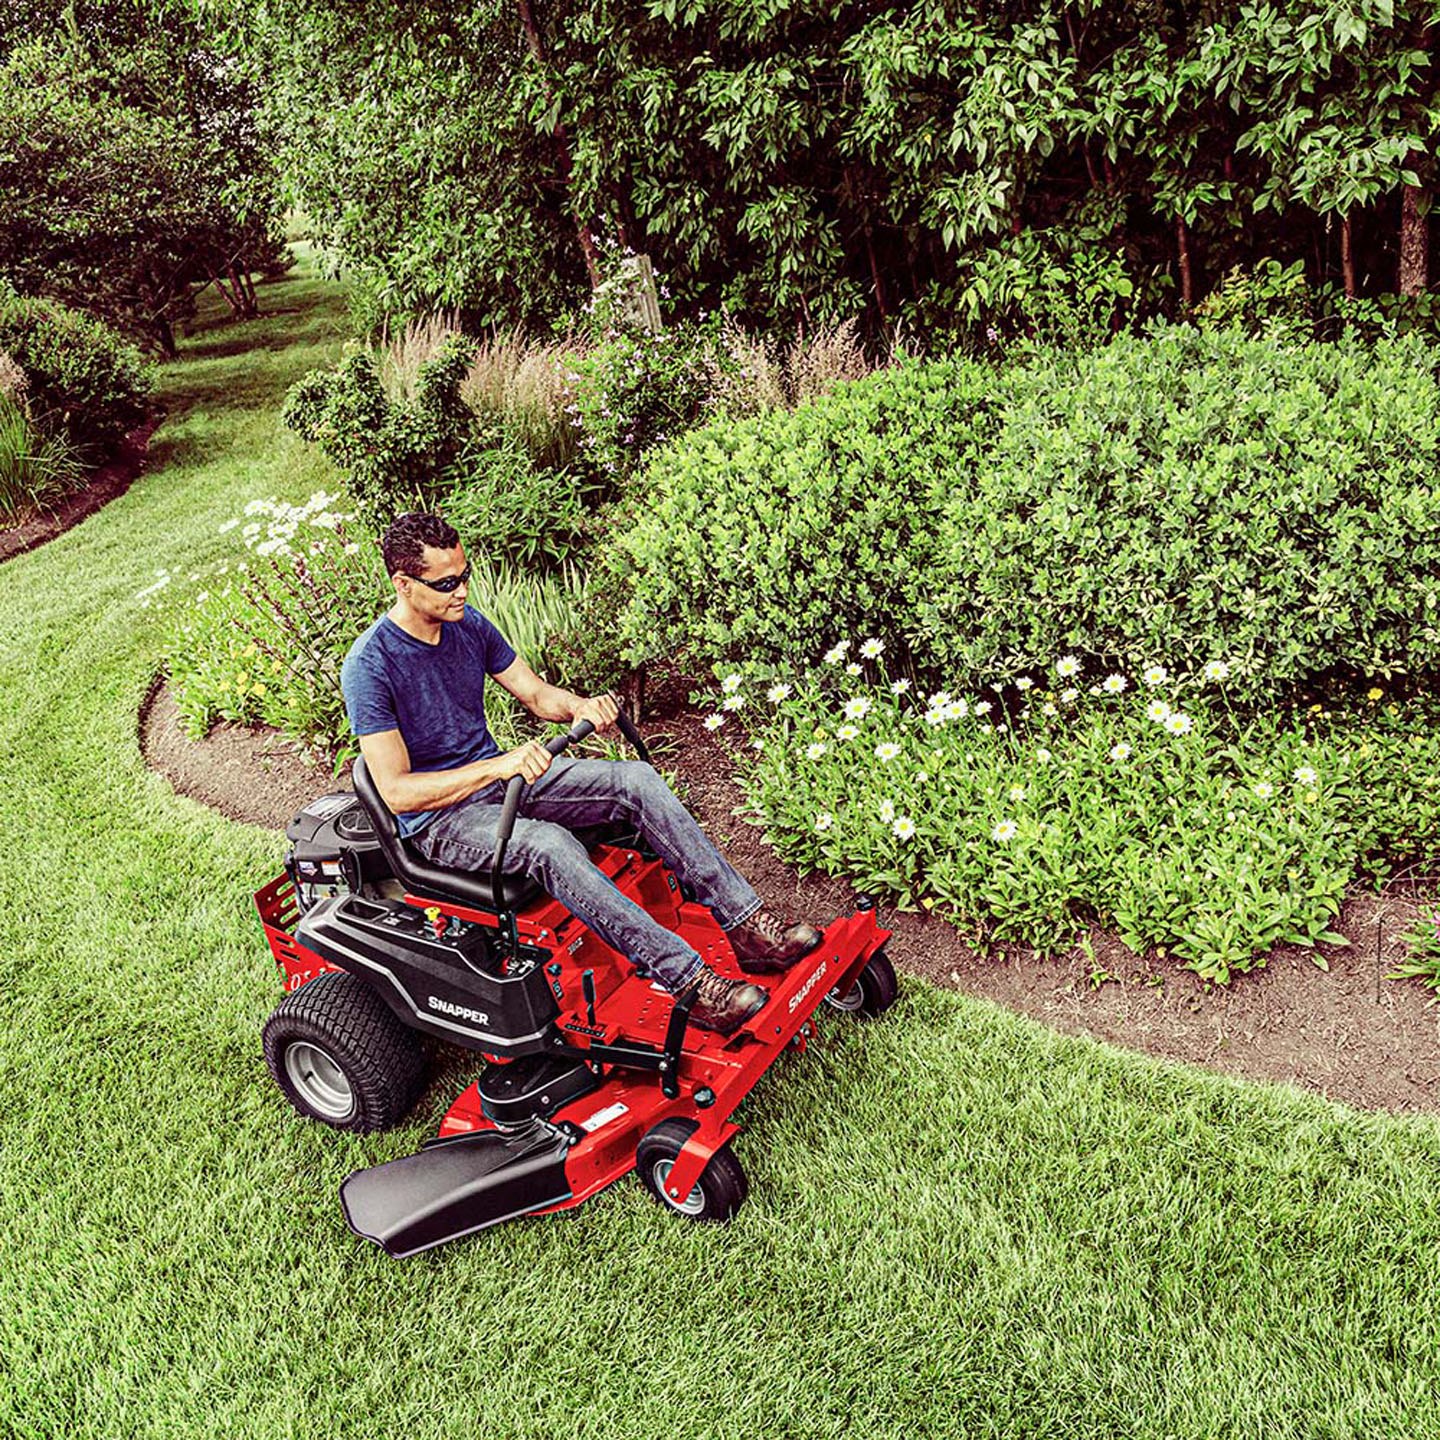 2022 Snapper 360Z 42 in. Briggs & Stratton PXi Series 23 hp in Rice Lake, Wisconsin - Photo 6